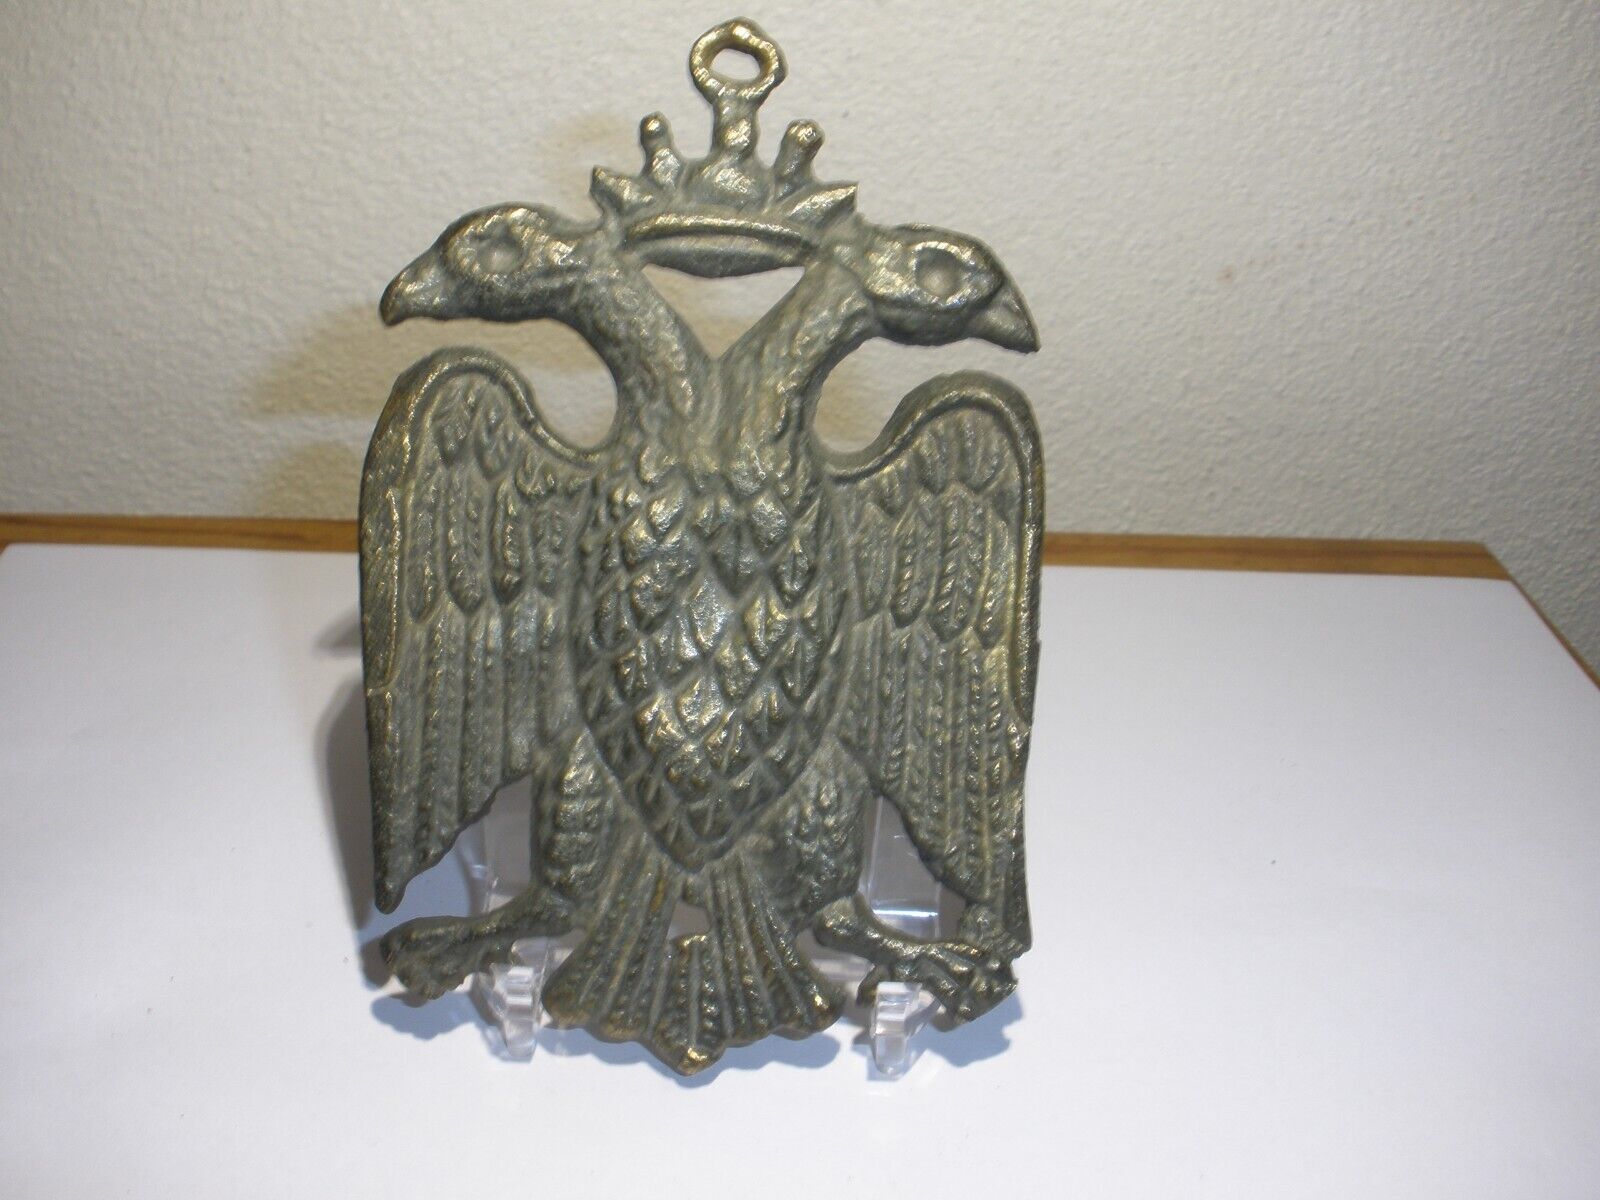 Vintage Brass Byzantine Symbol Double-Headed Eagle Crest Coat Of Arms